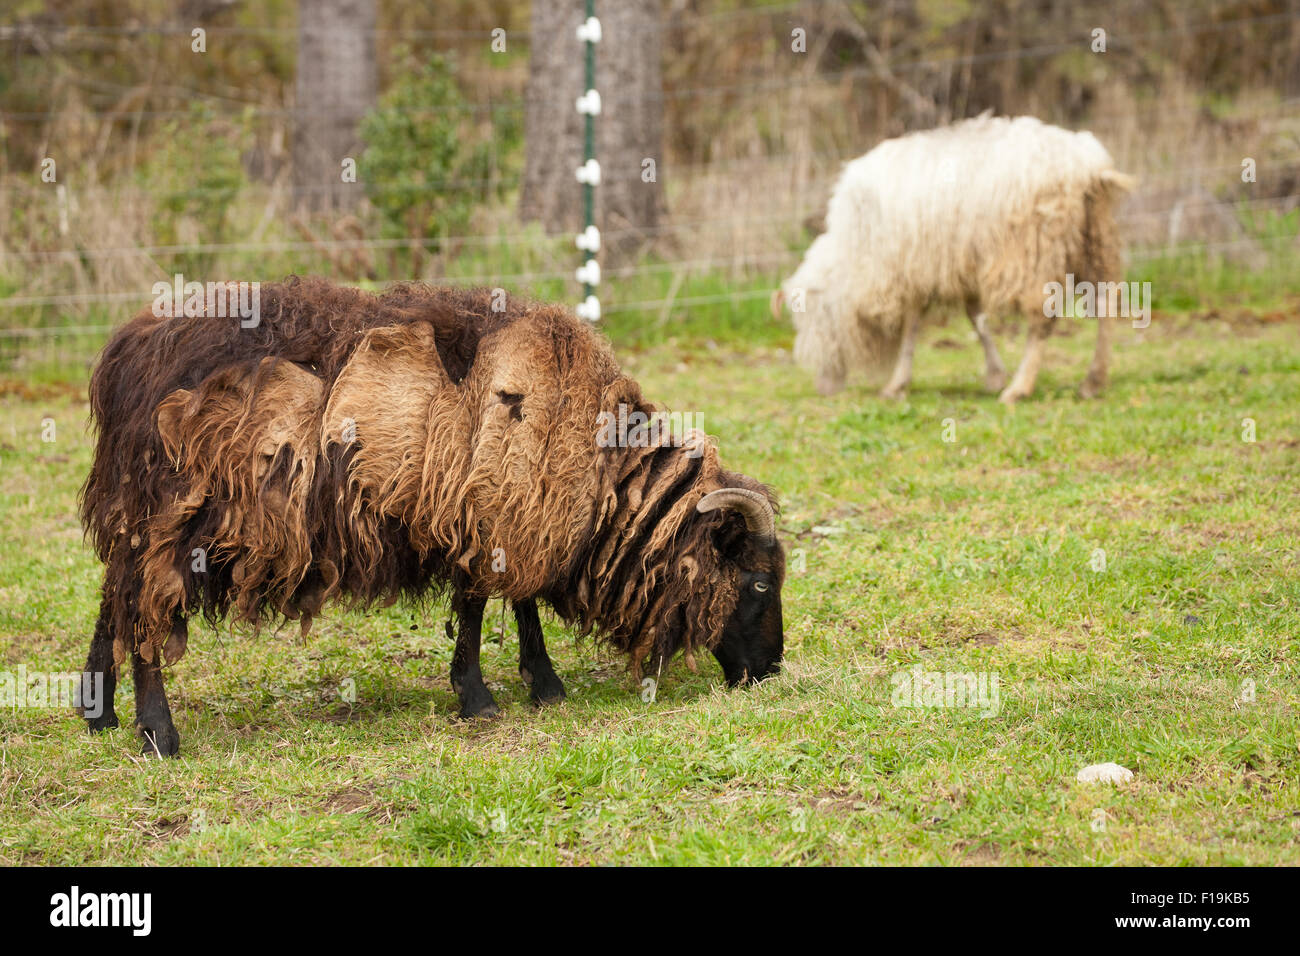 Two shaggy Icelandic sheep in the pasture, ready for shearing.  Icelandic sheep is one of the world's oldest and purest breeds. Stock Photo